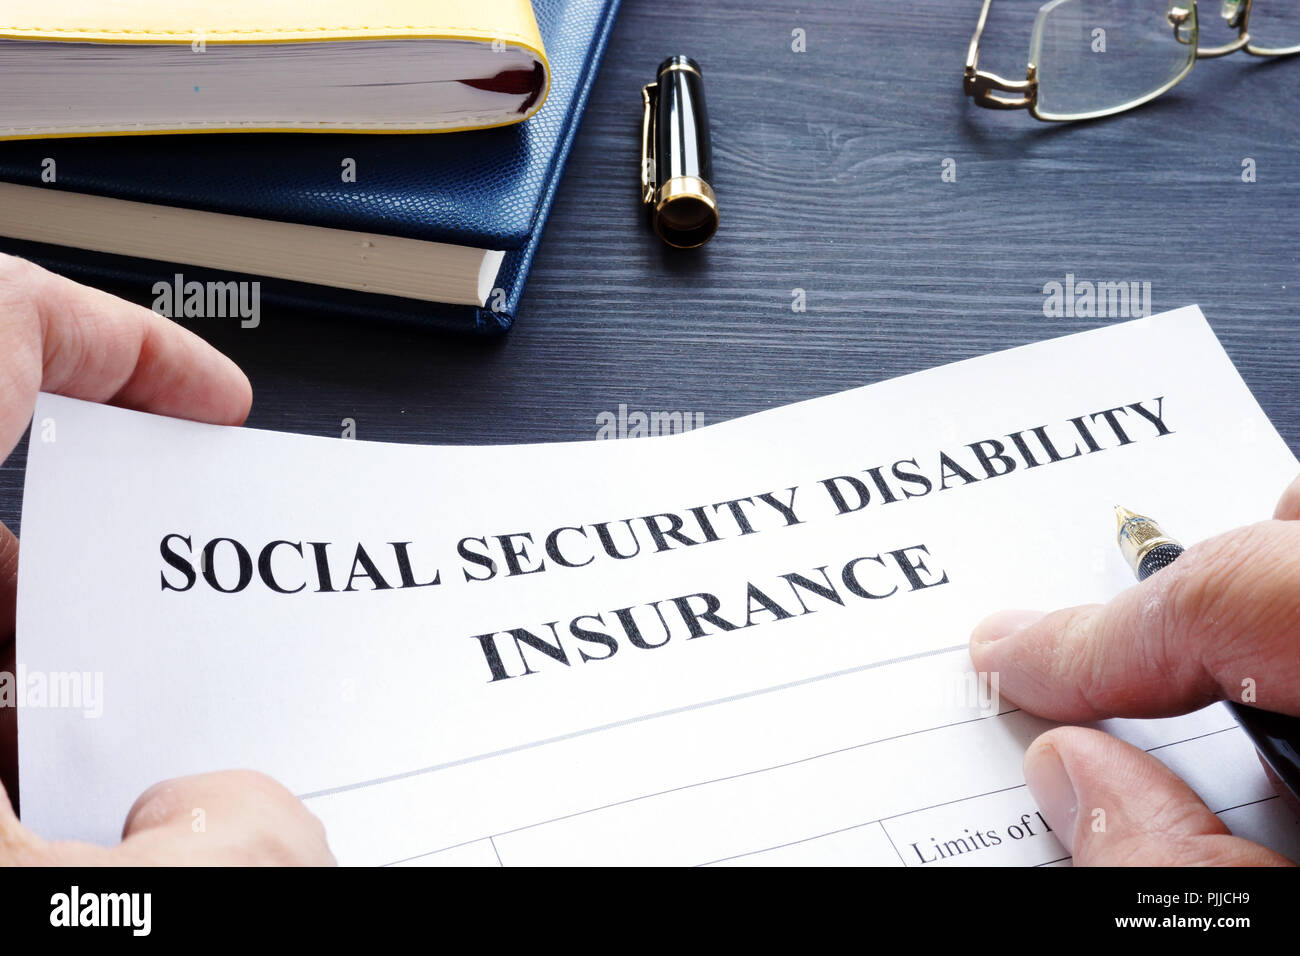 Man is holding Social Security Disability Insurance SSDI policy. Stock Photo